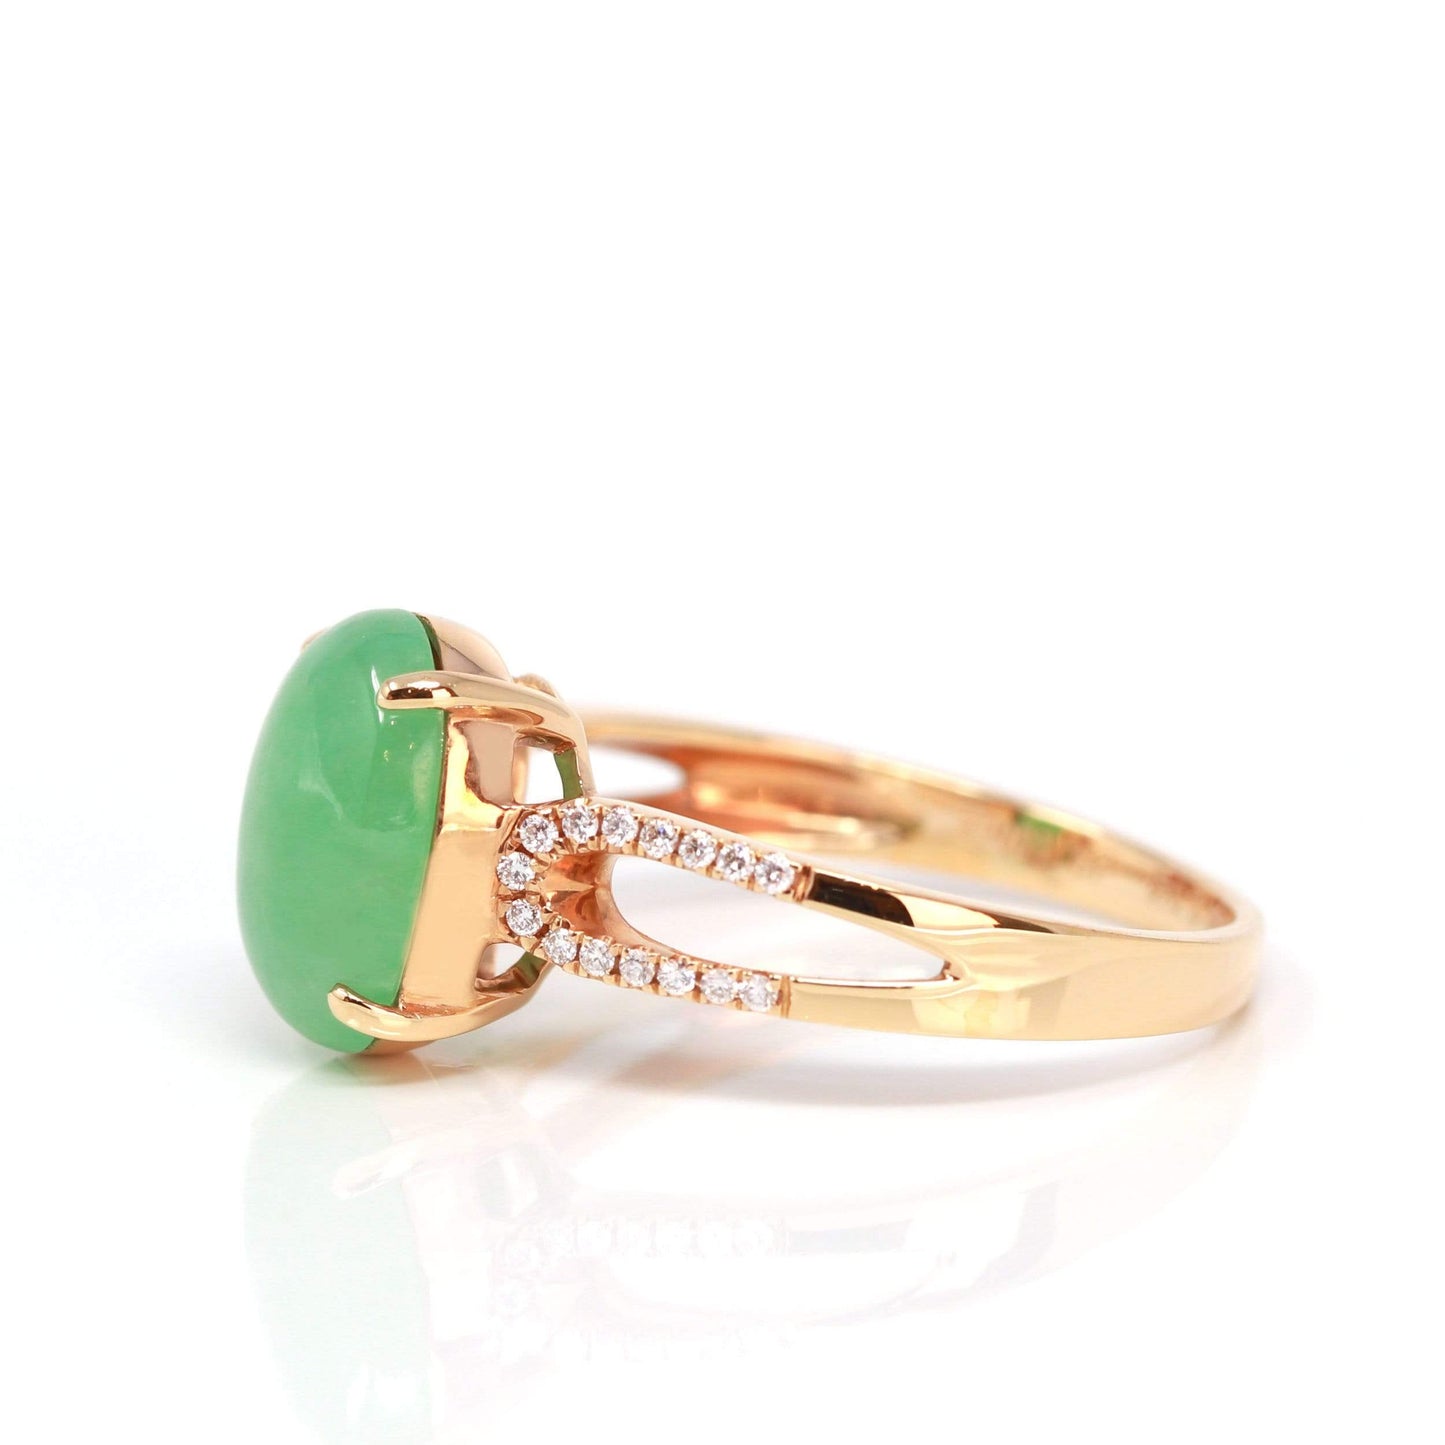 RealJade® "Imperial Cabochon" 18k Rose Gold Natural Gree Jadeite Ring With Diamonds